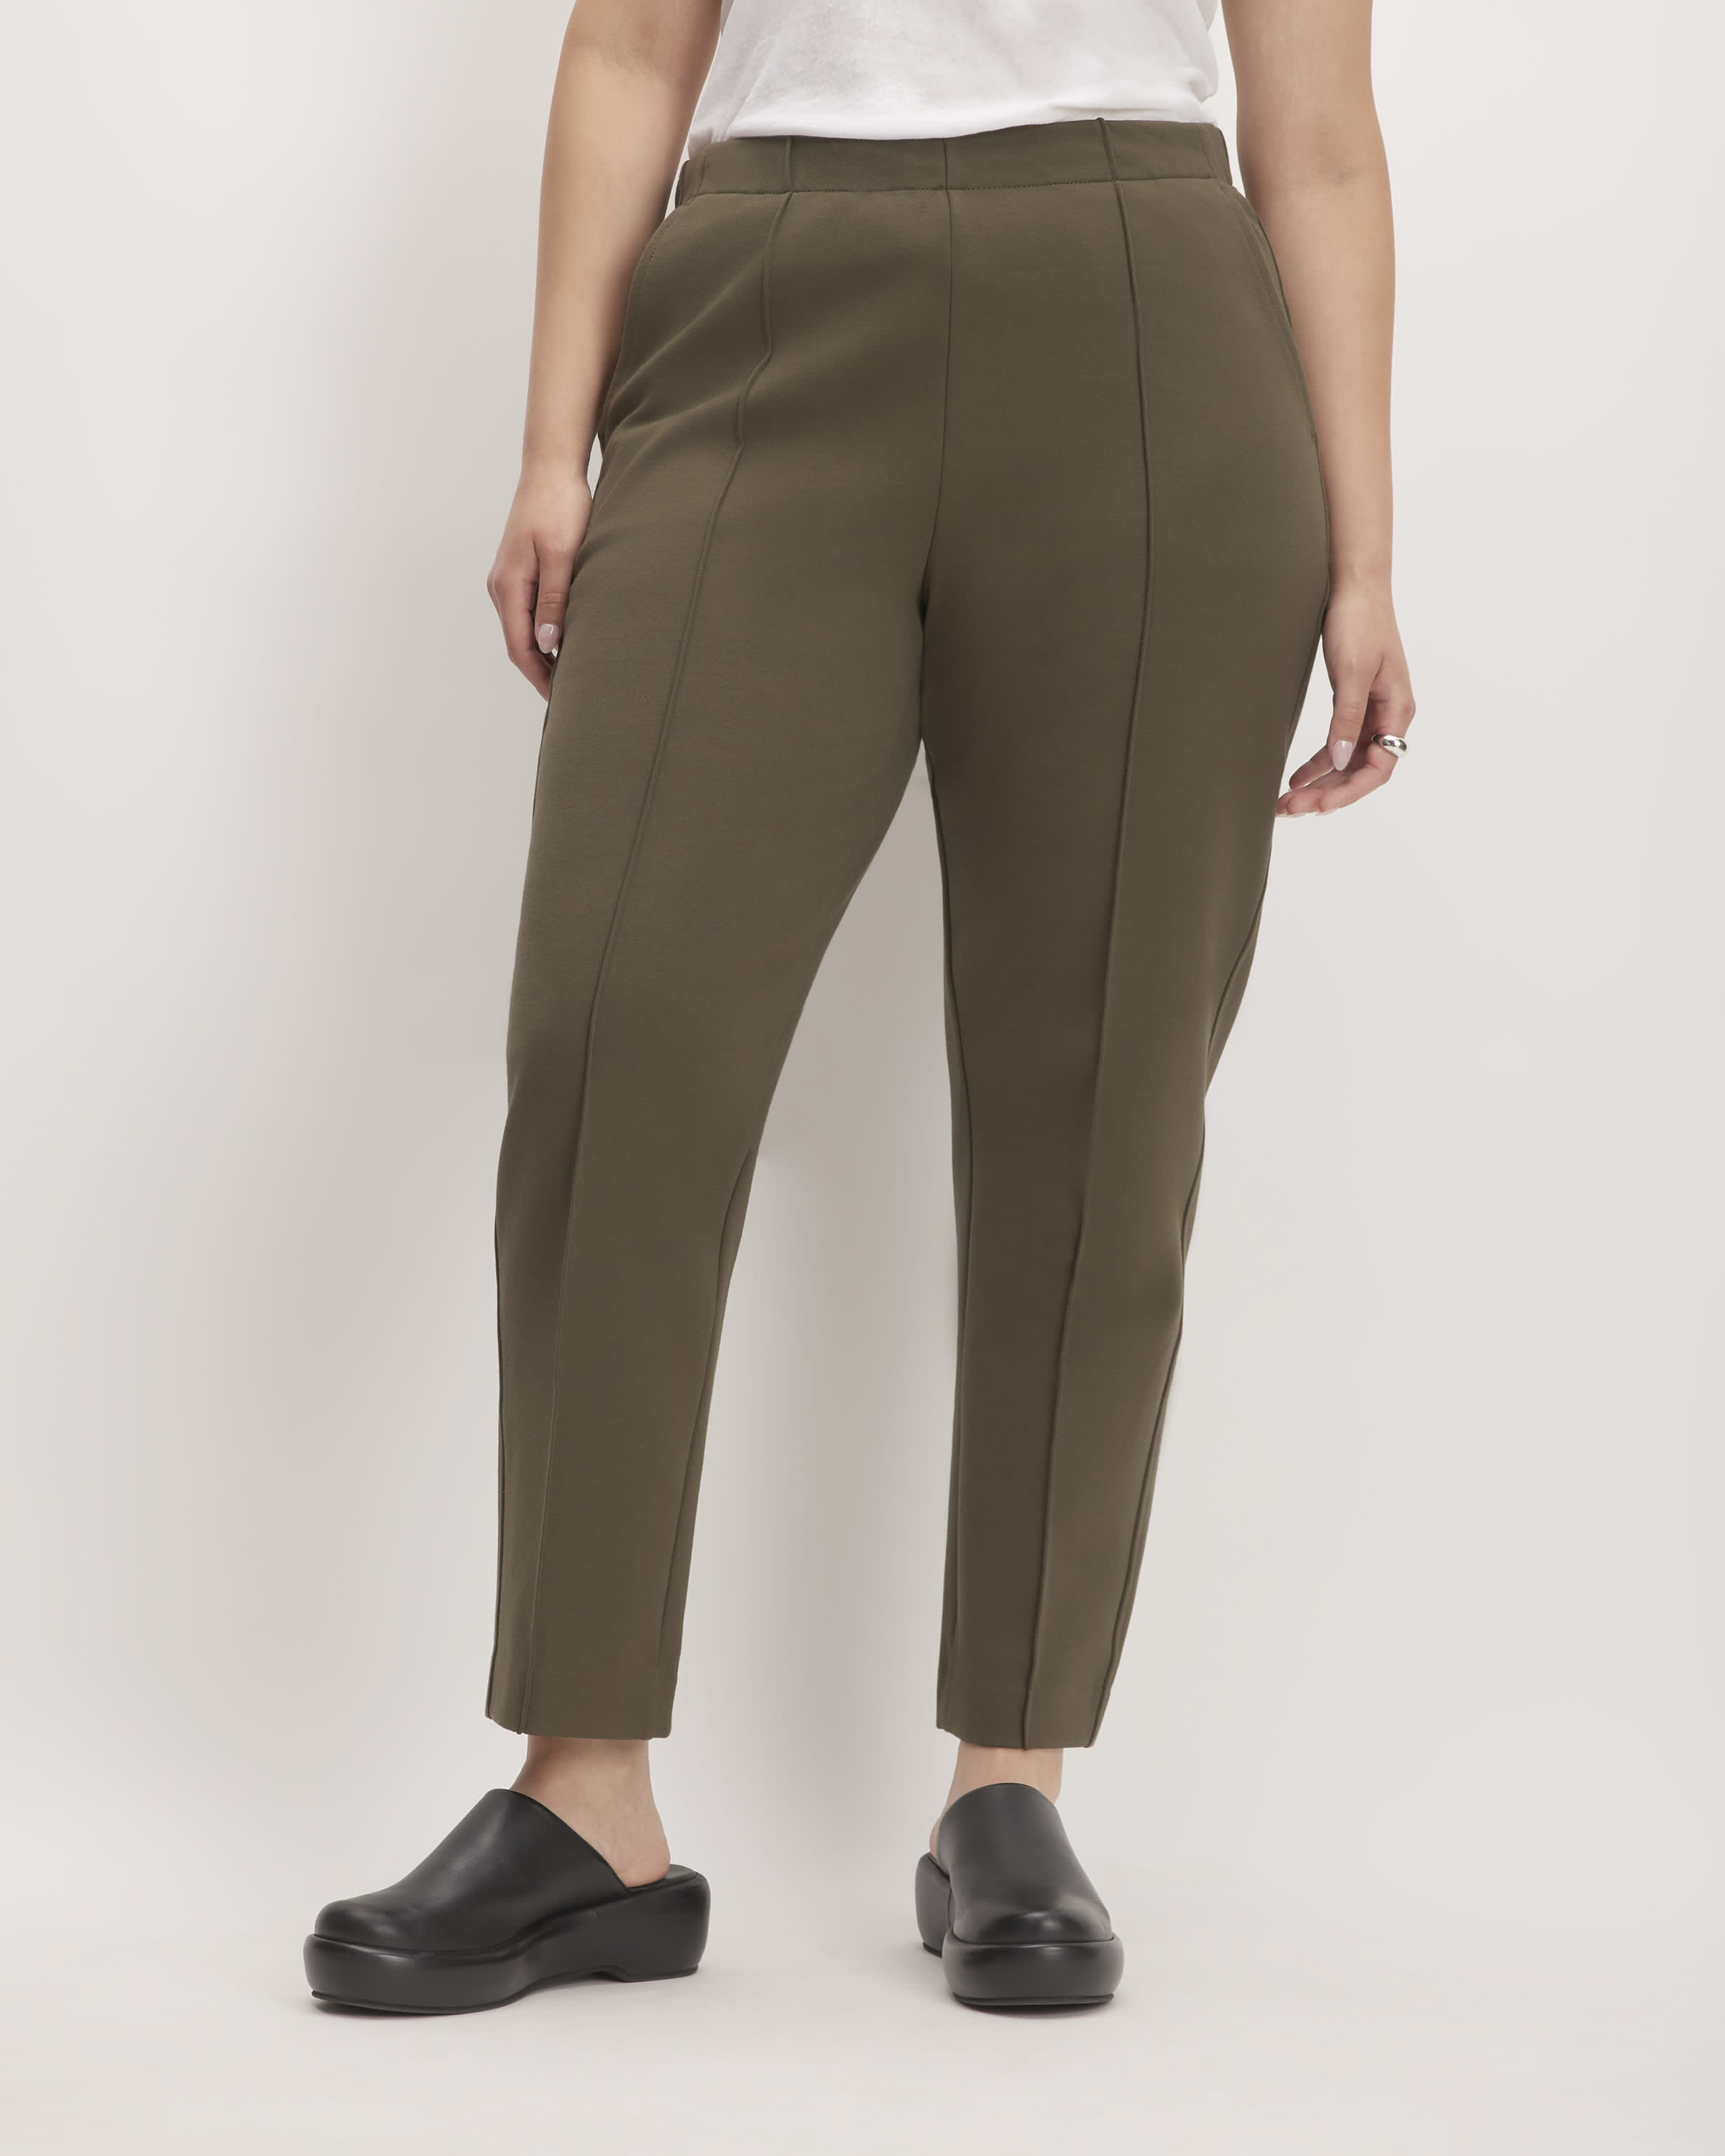 Another Dream Pant Set - Olive